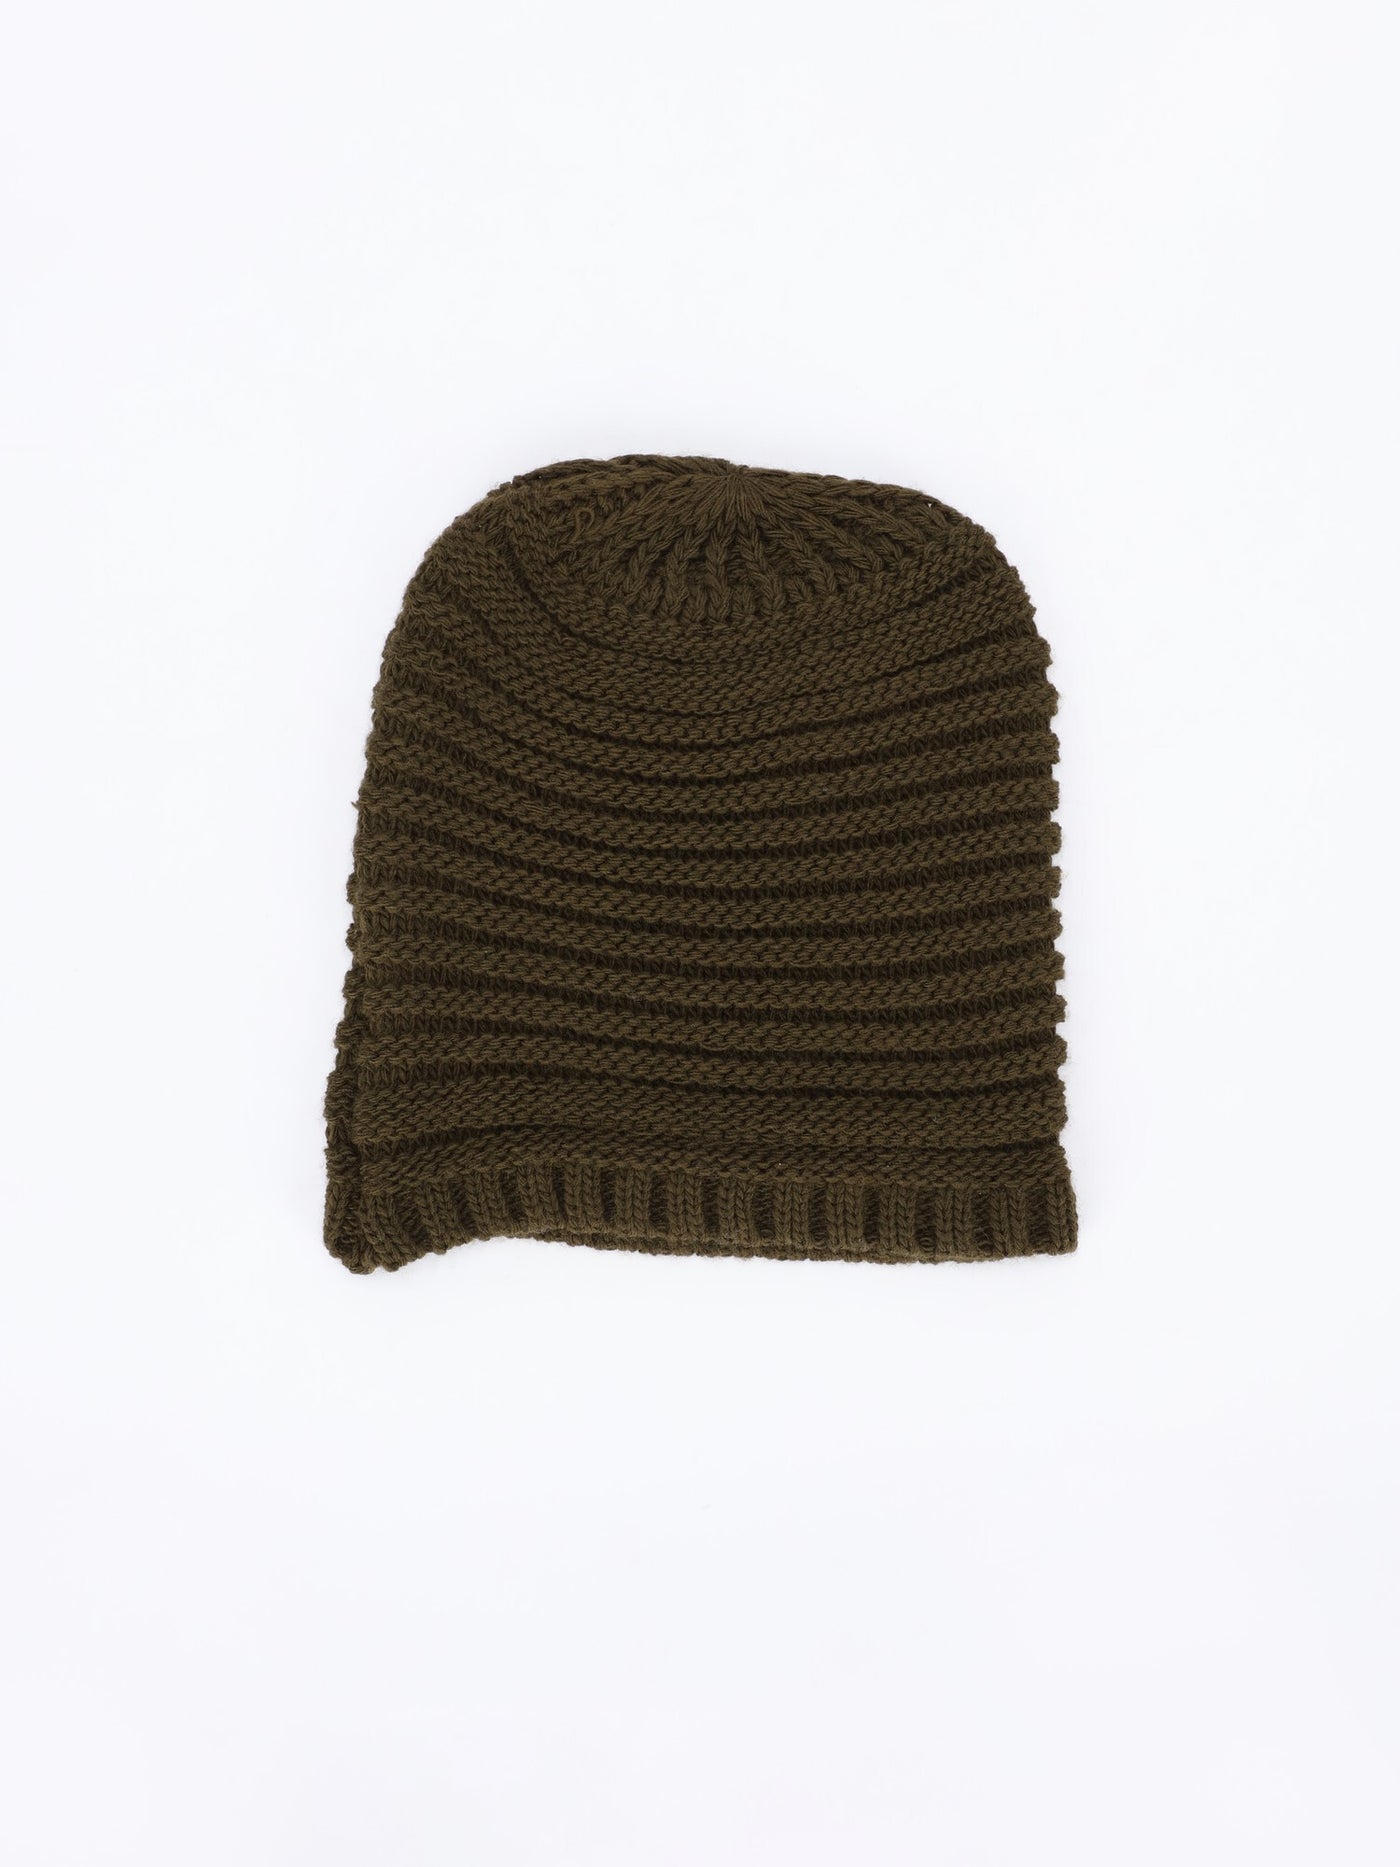 OR Men's Knitted Hat